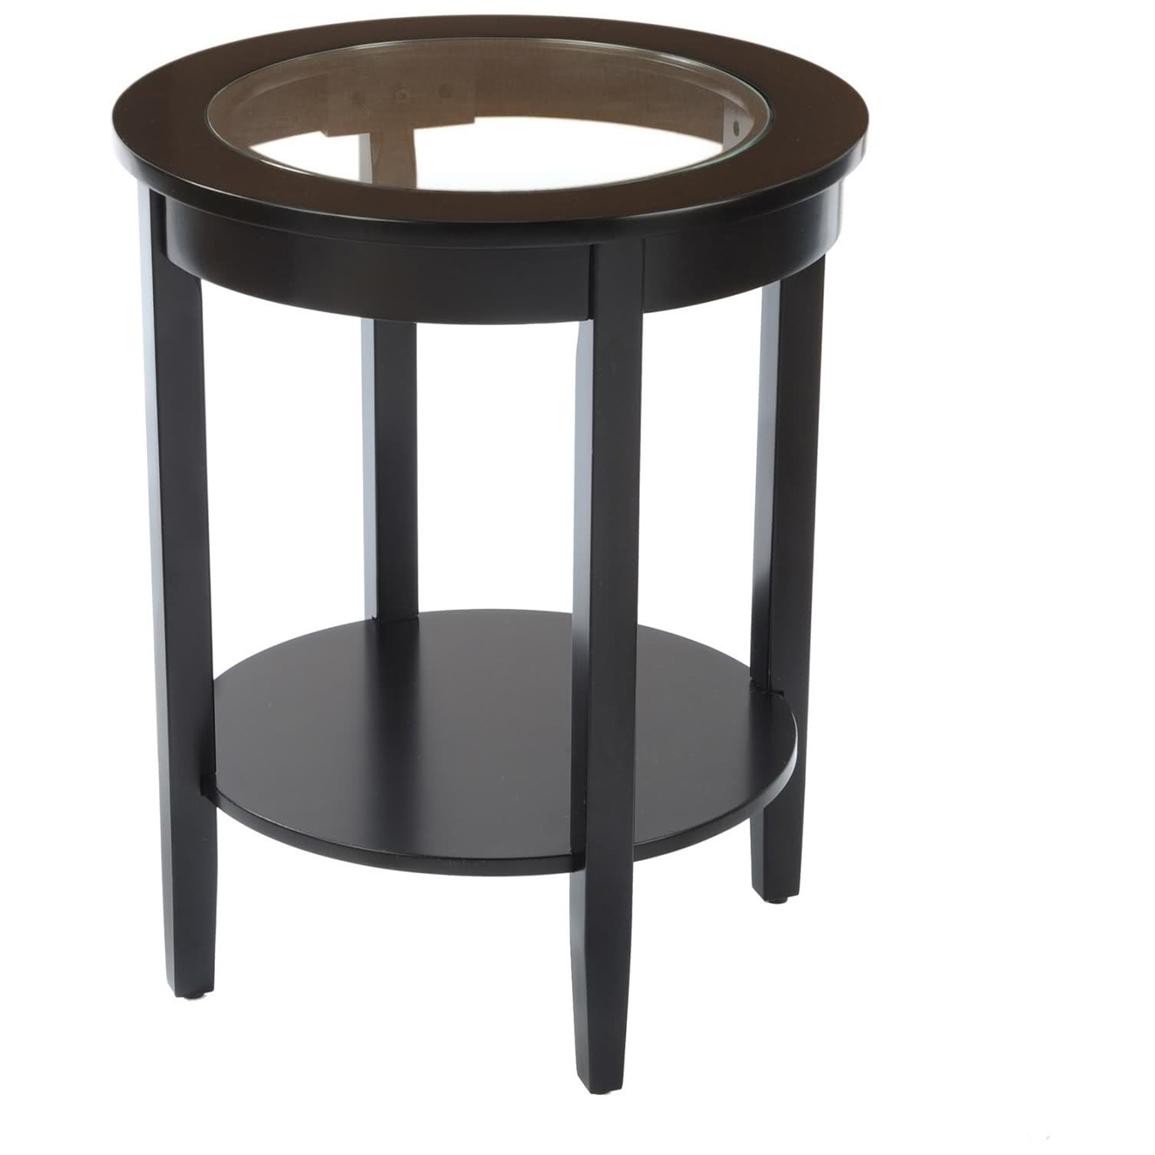 round side table with glass top living room furniture accent black chairs extendable trestle wine shelf outdoor wooden lamp indoor bistro target grey modern wool rugs legs ethan